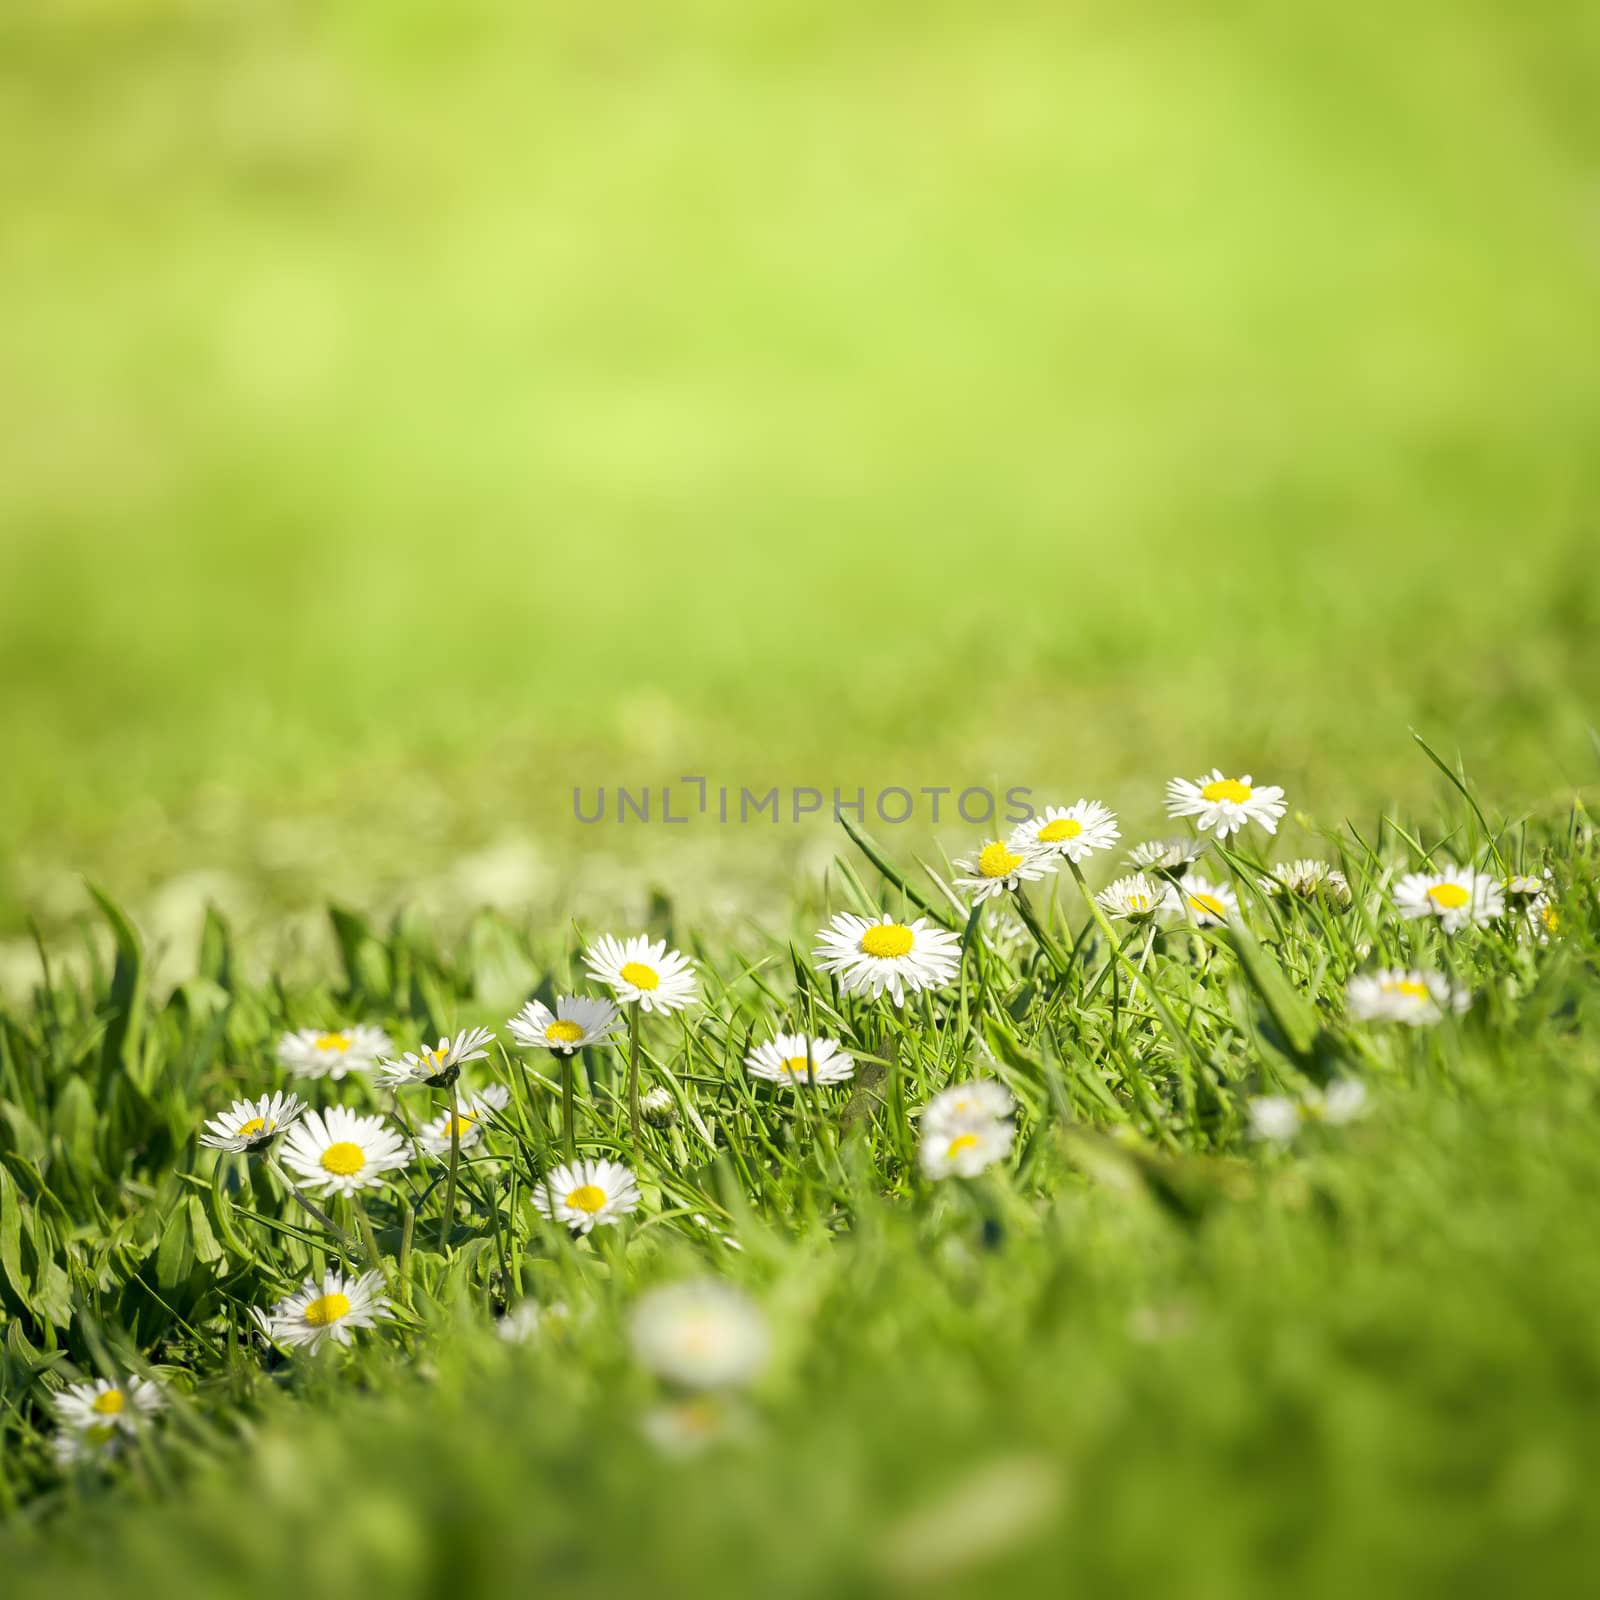 An image of a beautiful daisy flowers background